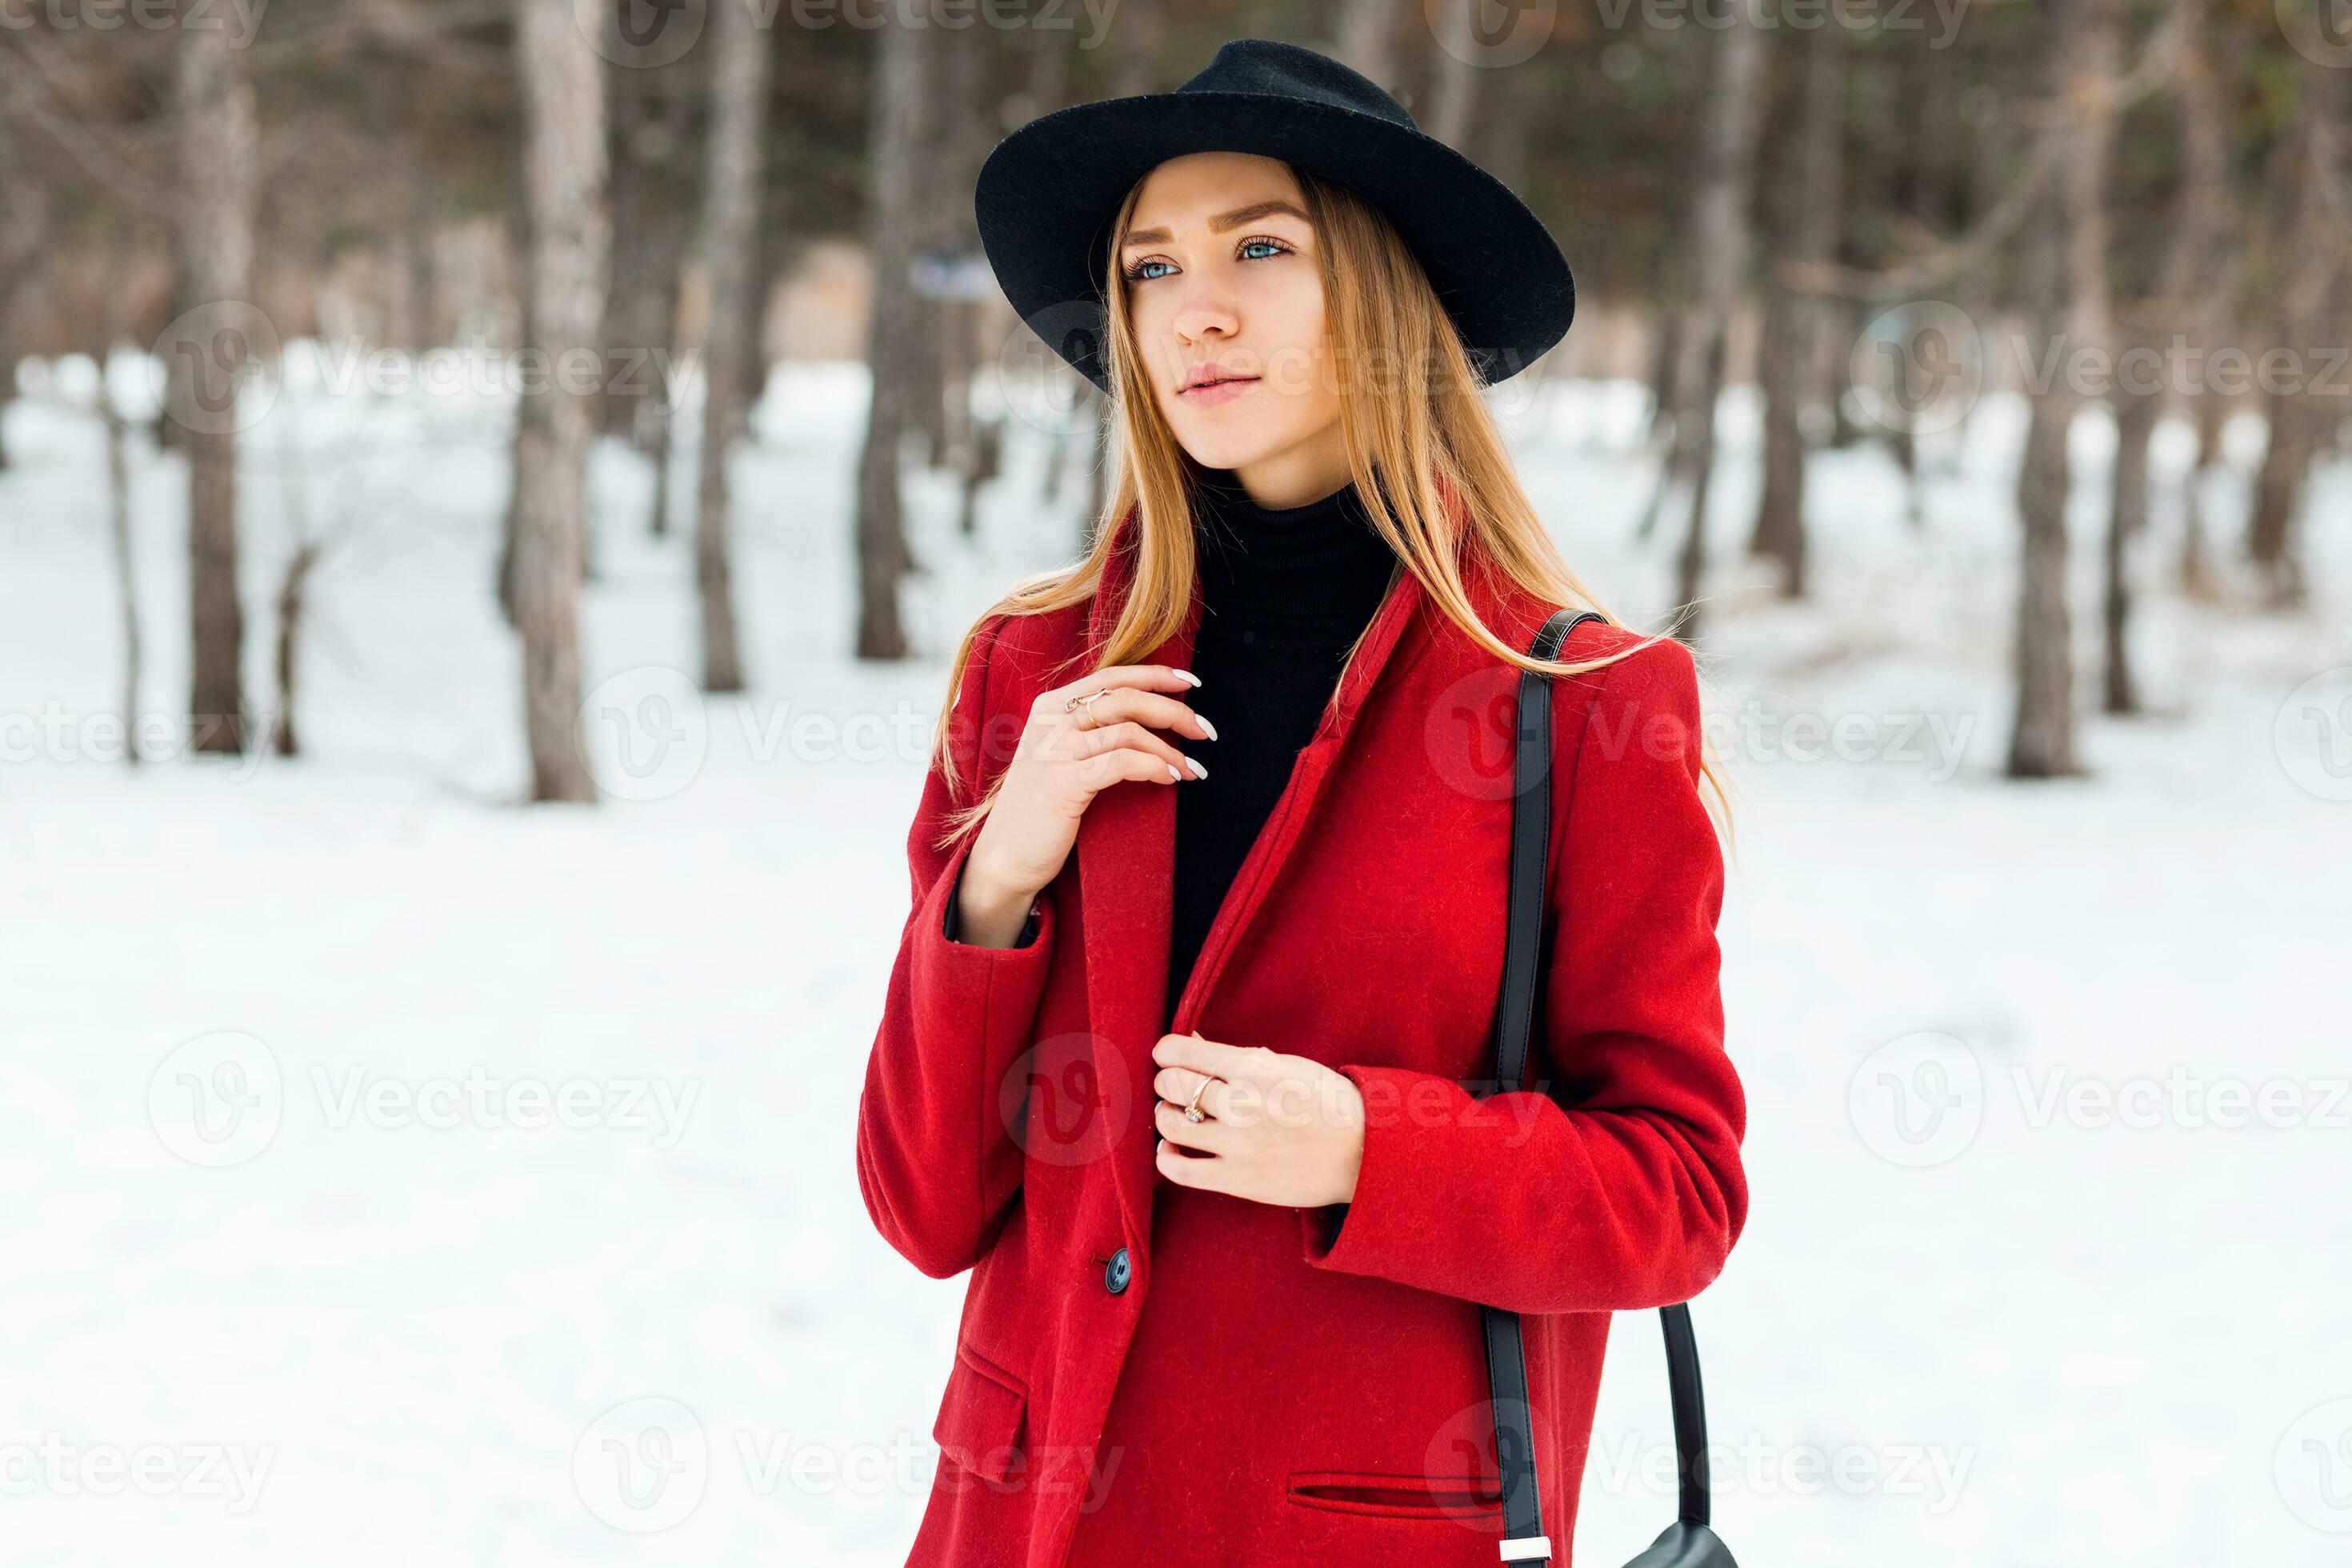 https://static.vecteezy.com/system/resources/previews/032/629/506/large_2x/outdoor-fashion-portrait-of-glamour-l-young-cheerful-stylish-lady-wearing-trendy-winter-outfit-black-wool-hat-and-red-coat-cold-season-blonde-long-hair-full-lips-blue-eyes-photo.jpg